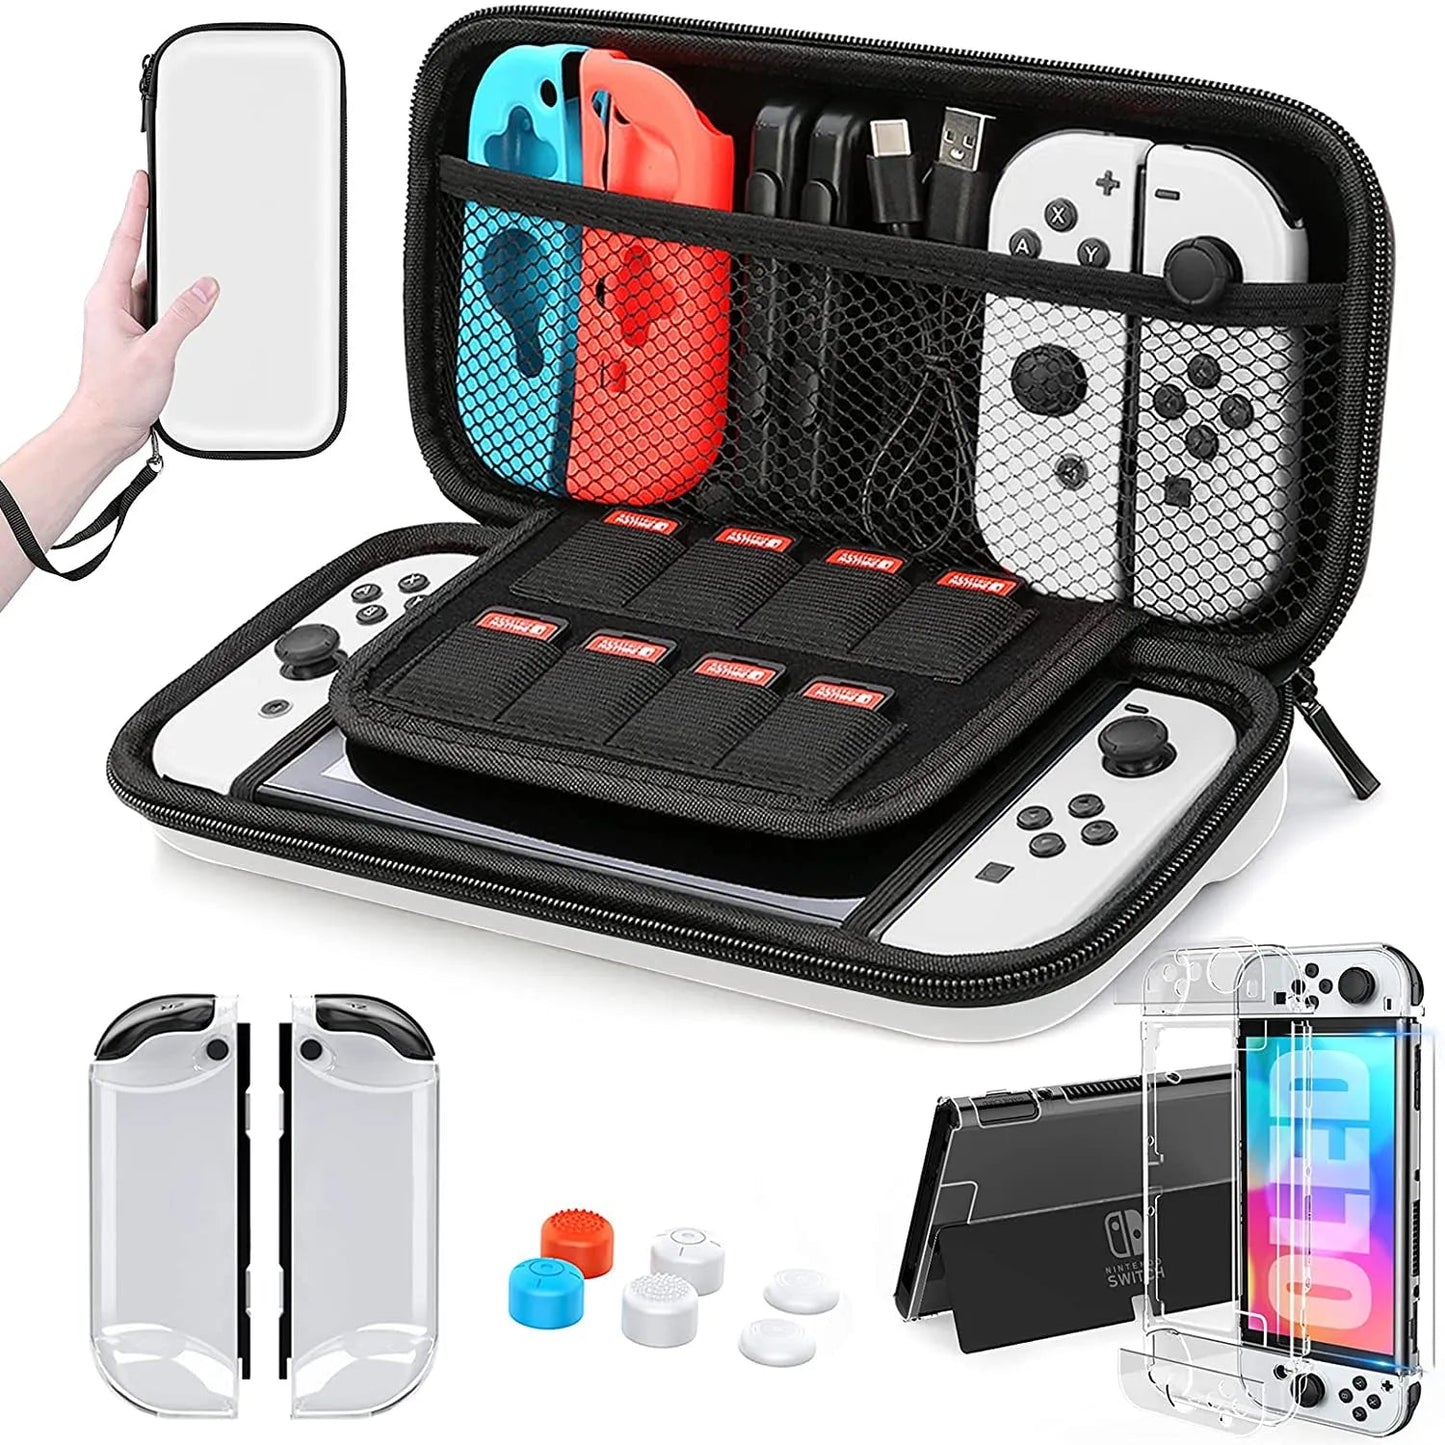 For Switch OLED Model Carrying Case 9 in 1 Accessories Kit for 2022 Nintendo Switch OLED Model with Protective Case White